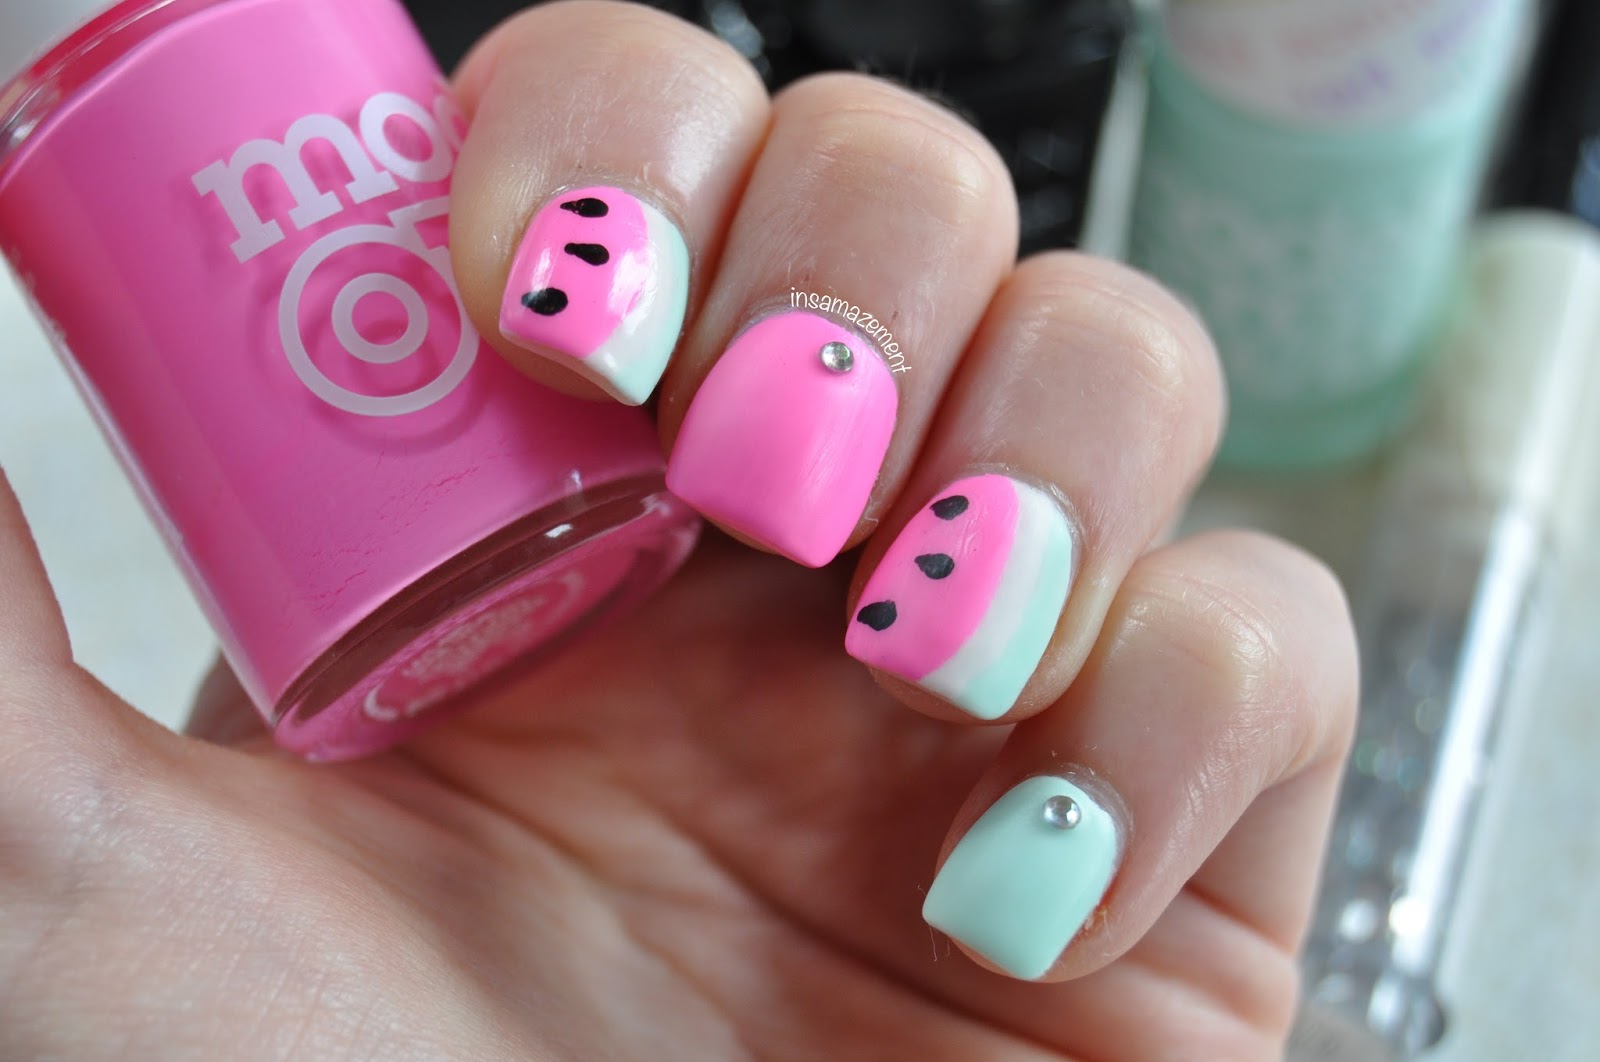 Watermelon Nail Art Toes: 10 Creative Ways to Use Watermelon Colors - wide 1